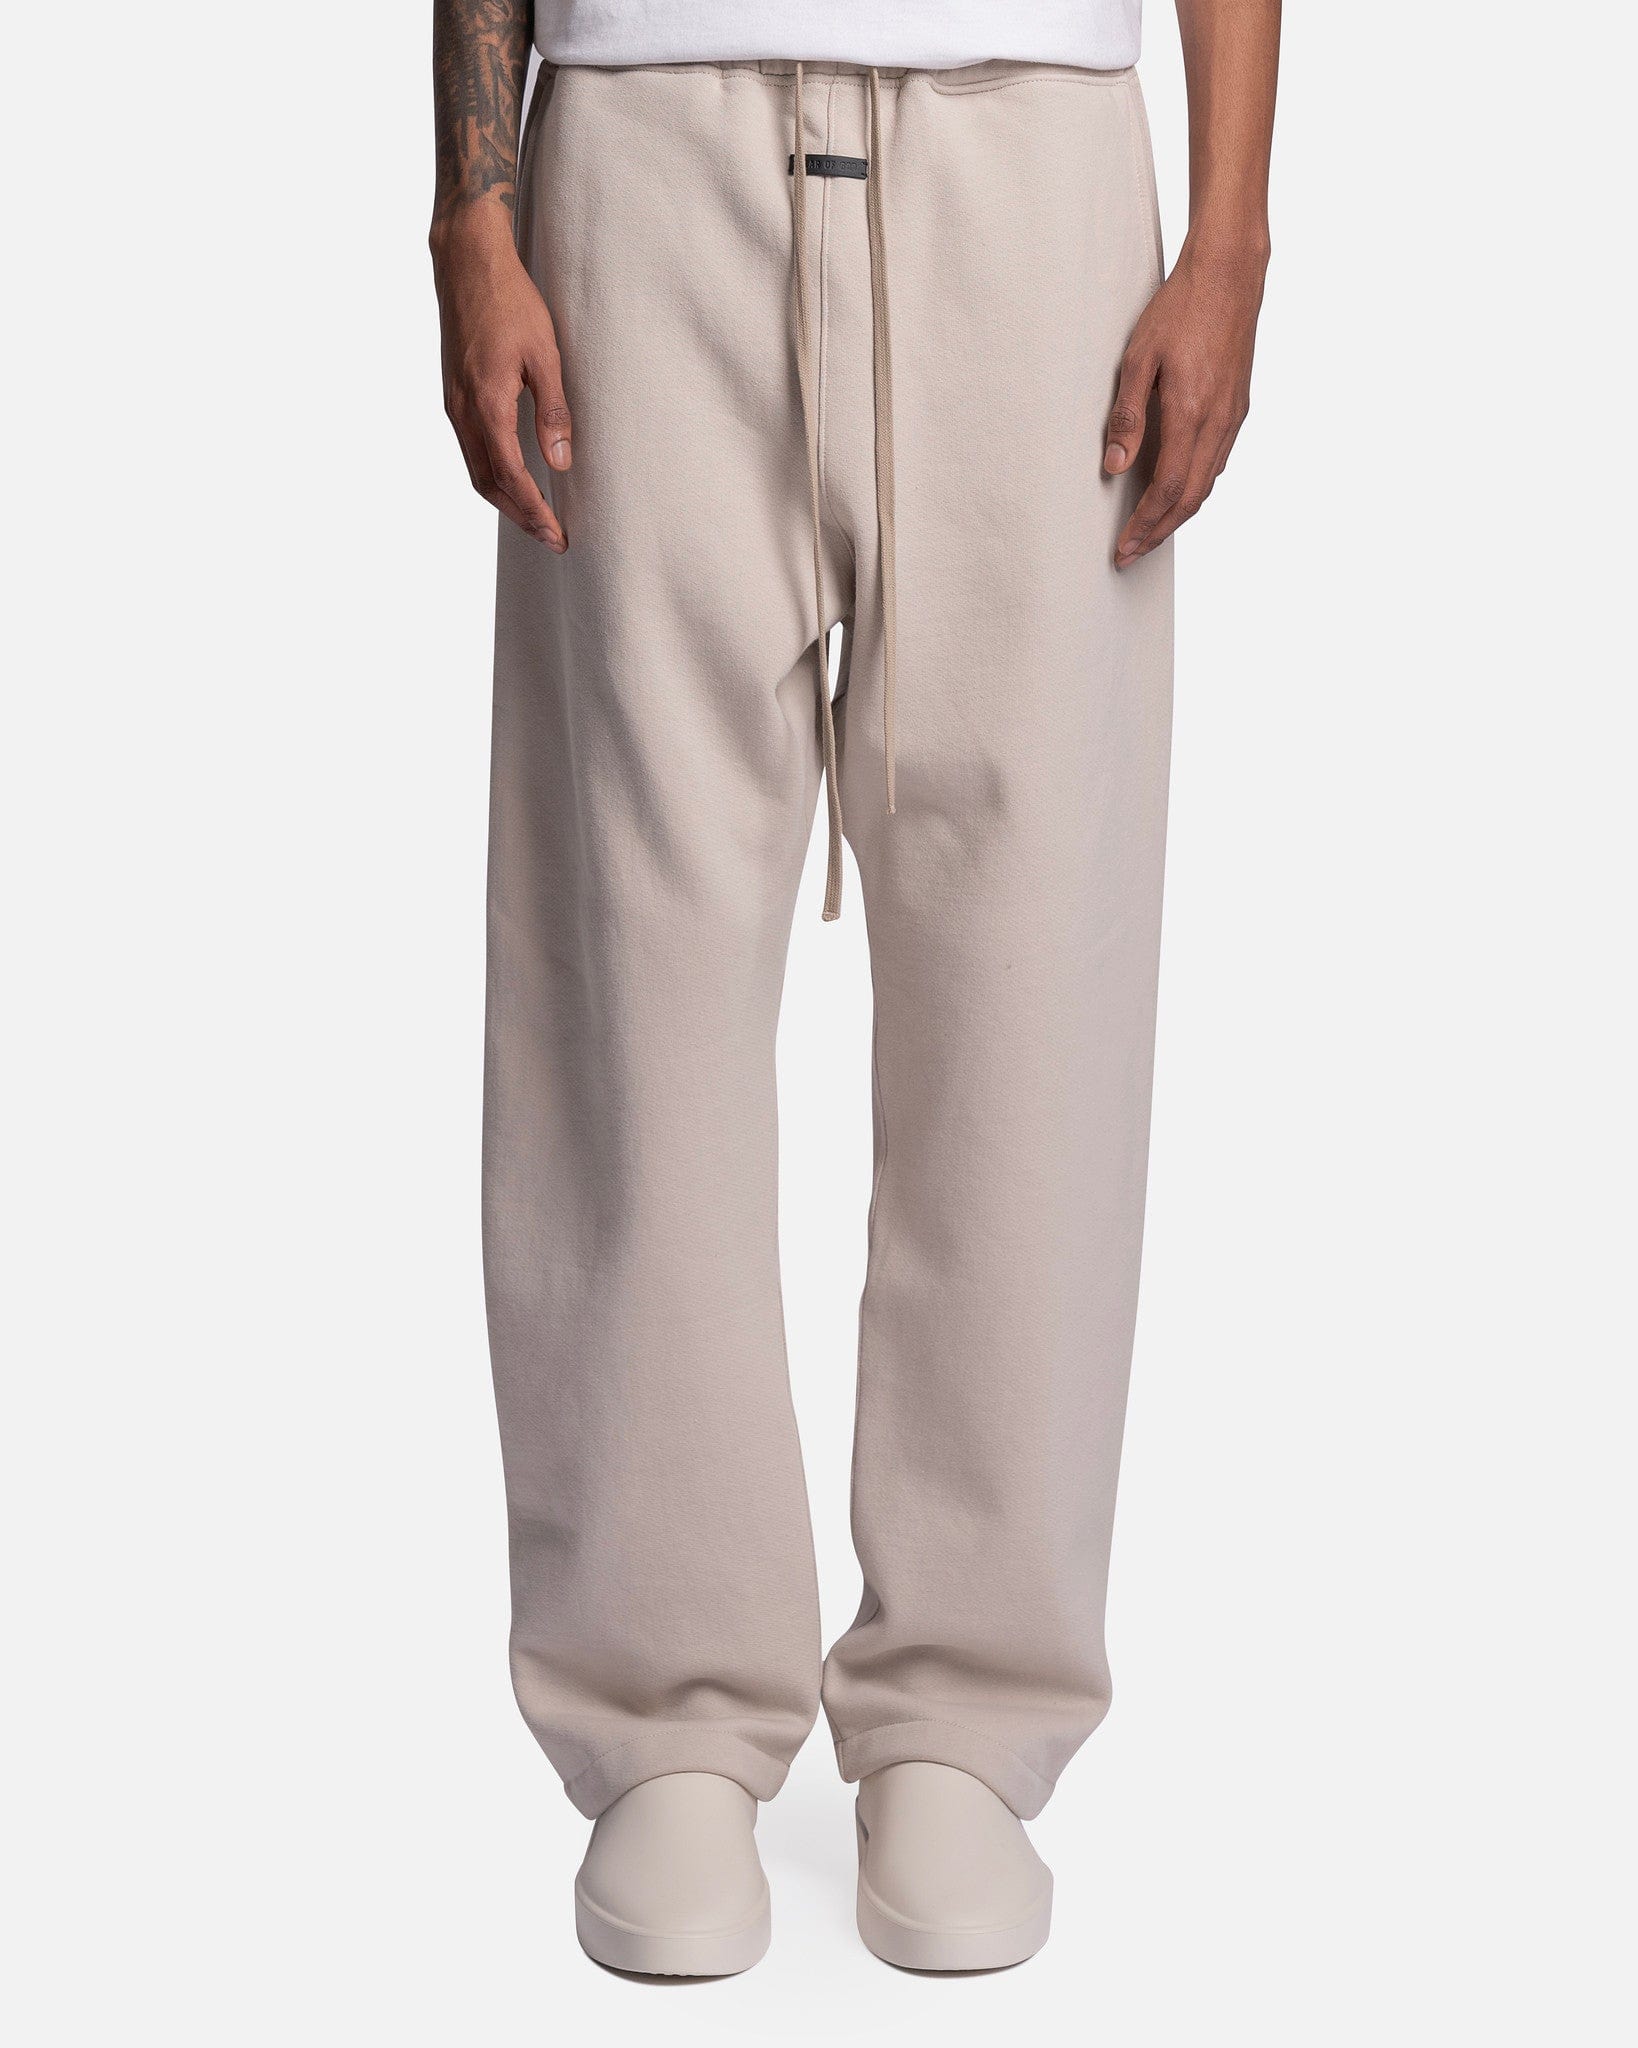 Eternal Relaxed Sweatpants in Cement